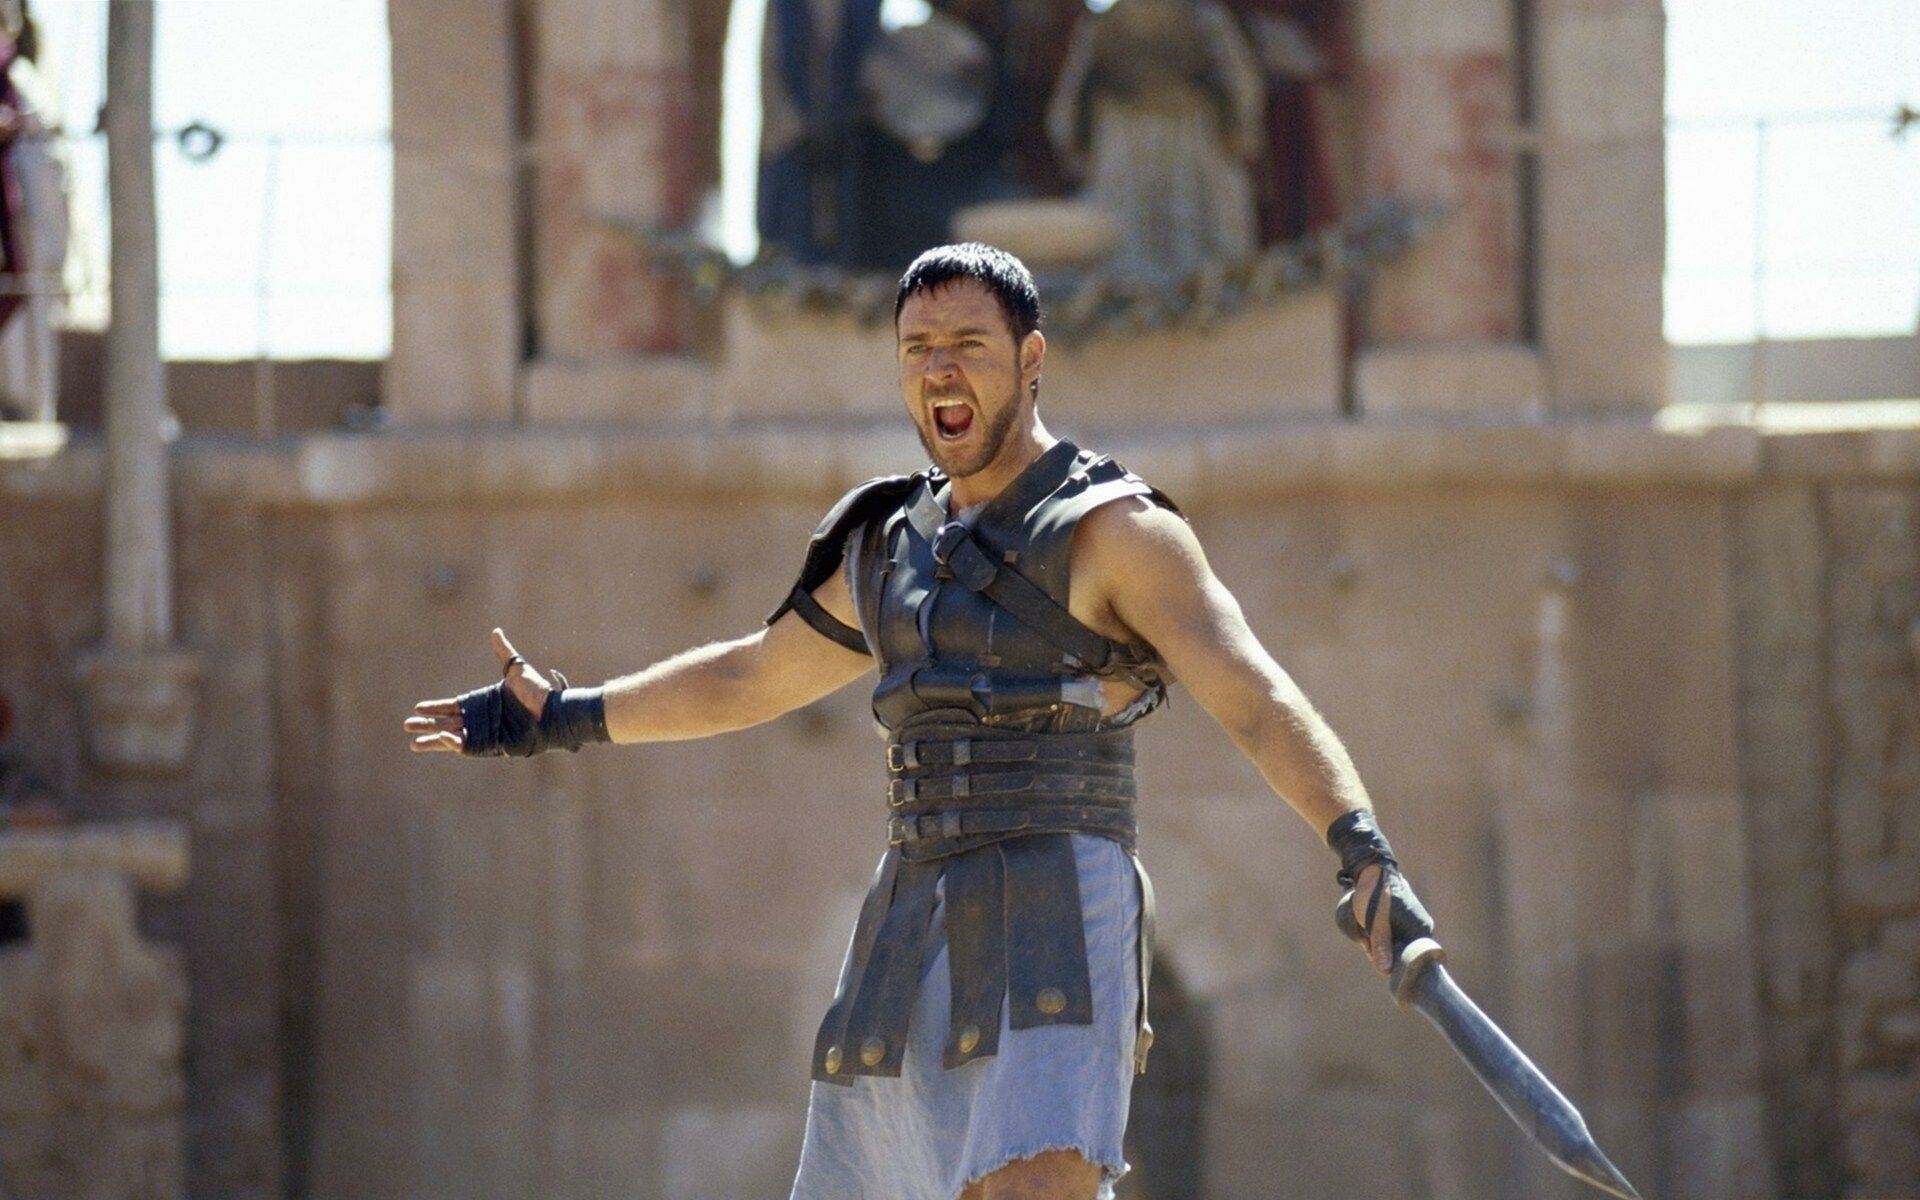 Gladiator: A 2000 movie in which Russell Crowe plays a Roman general. 1920x1200 HD Wallpaper.